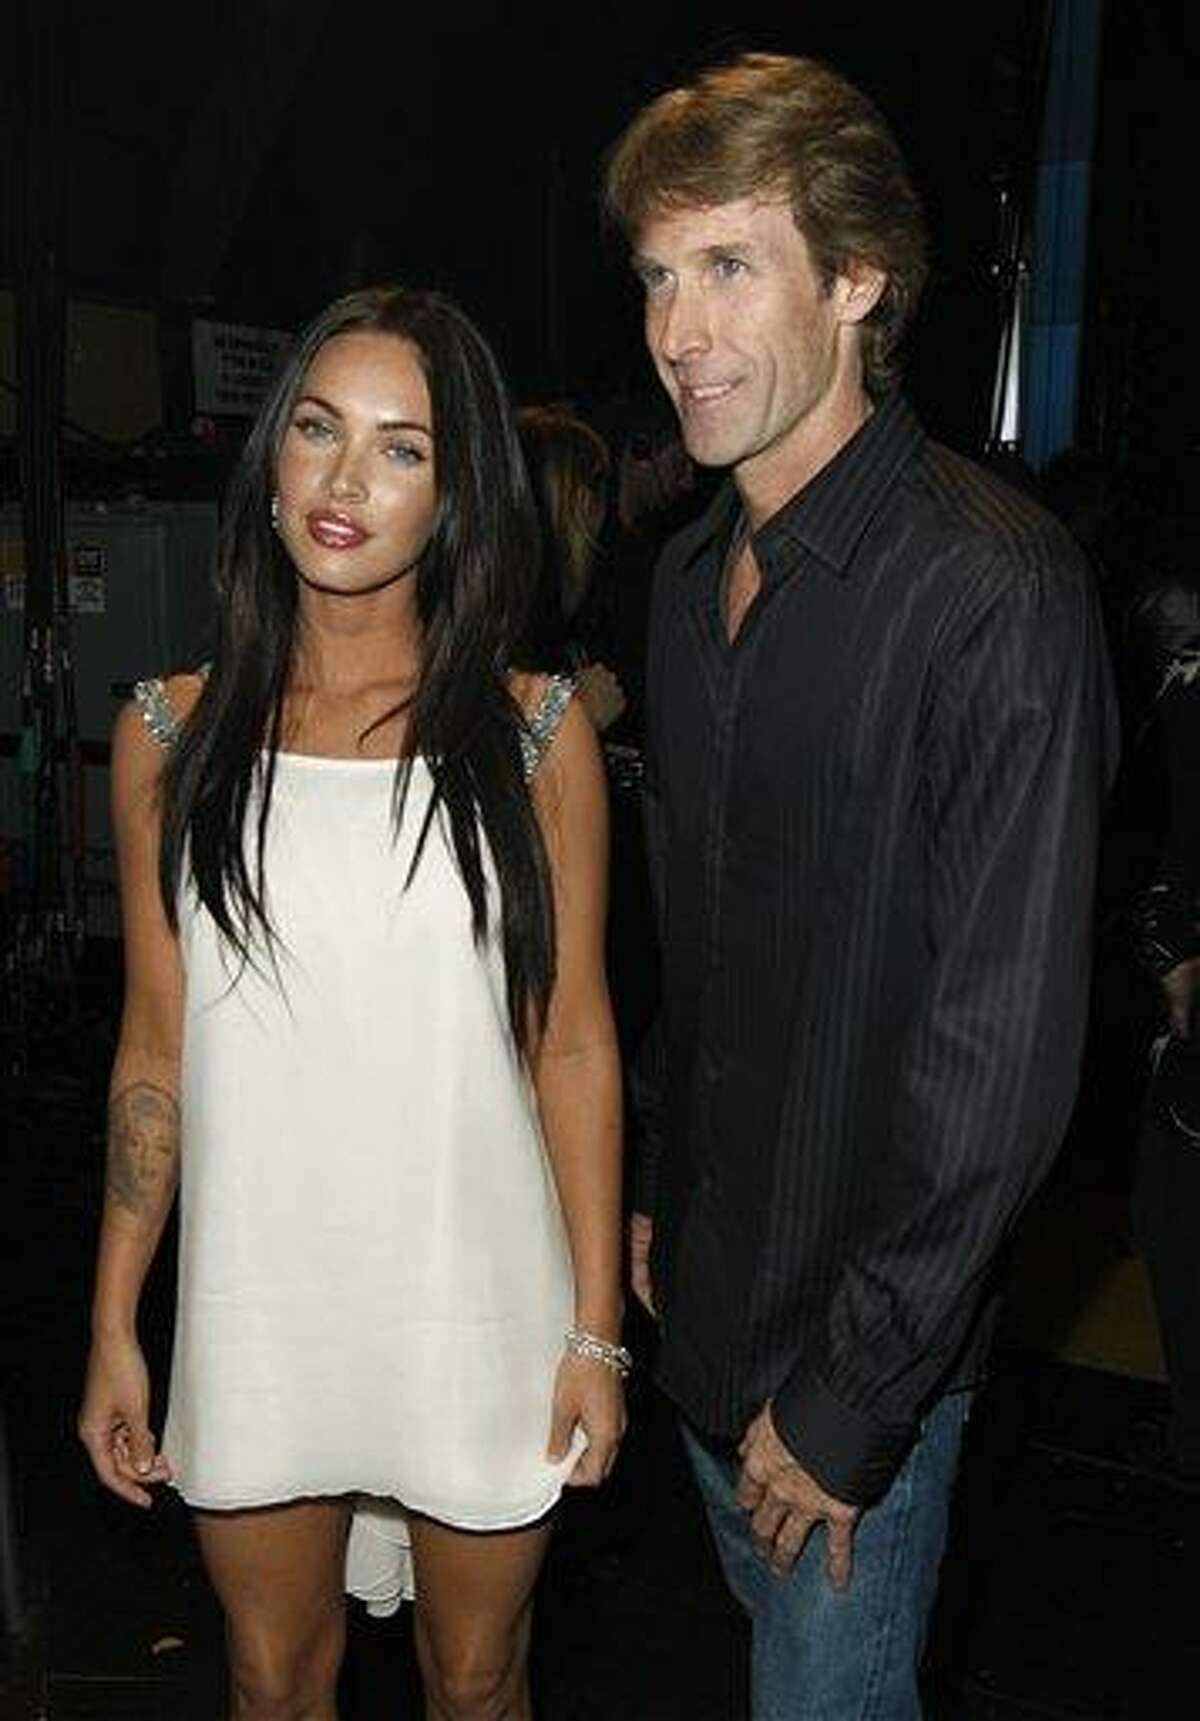 In this June 1, 2008 file photo, actress Megan Fox, left, and director Michael Bay pose together at the MTV Movie Awards in Los Angeles. Bay directed Fox in the films "Transformers," and "Transformers: Revenge of the Fallen." (AP Photo/Matt Sayles, file)